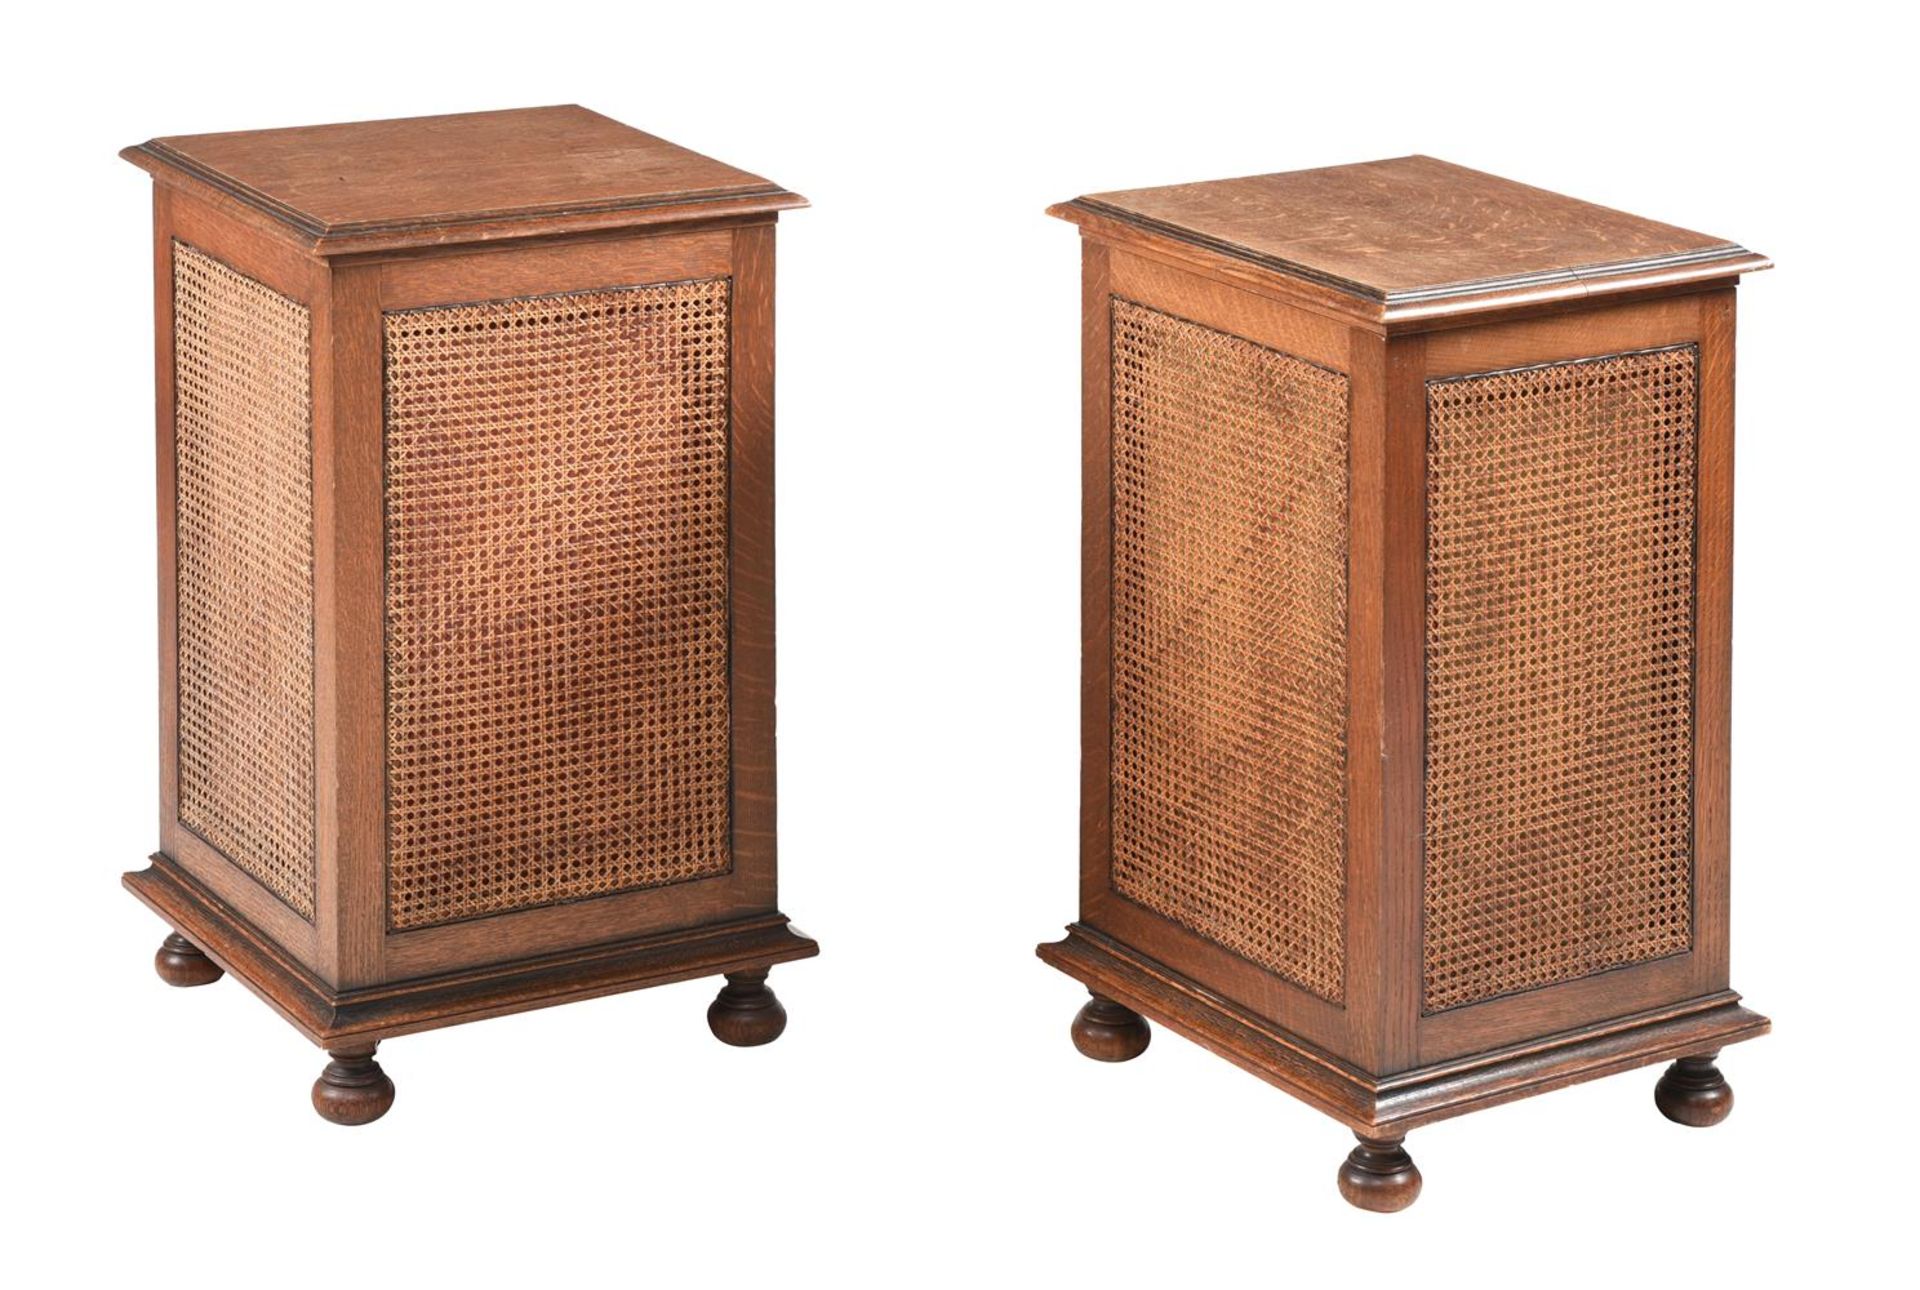 A PAIR OF OAK AND SPLIT-CANE PANELLED LAUNDRY BASKETS